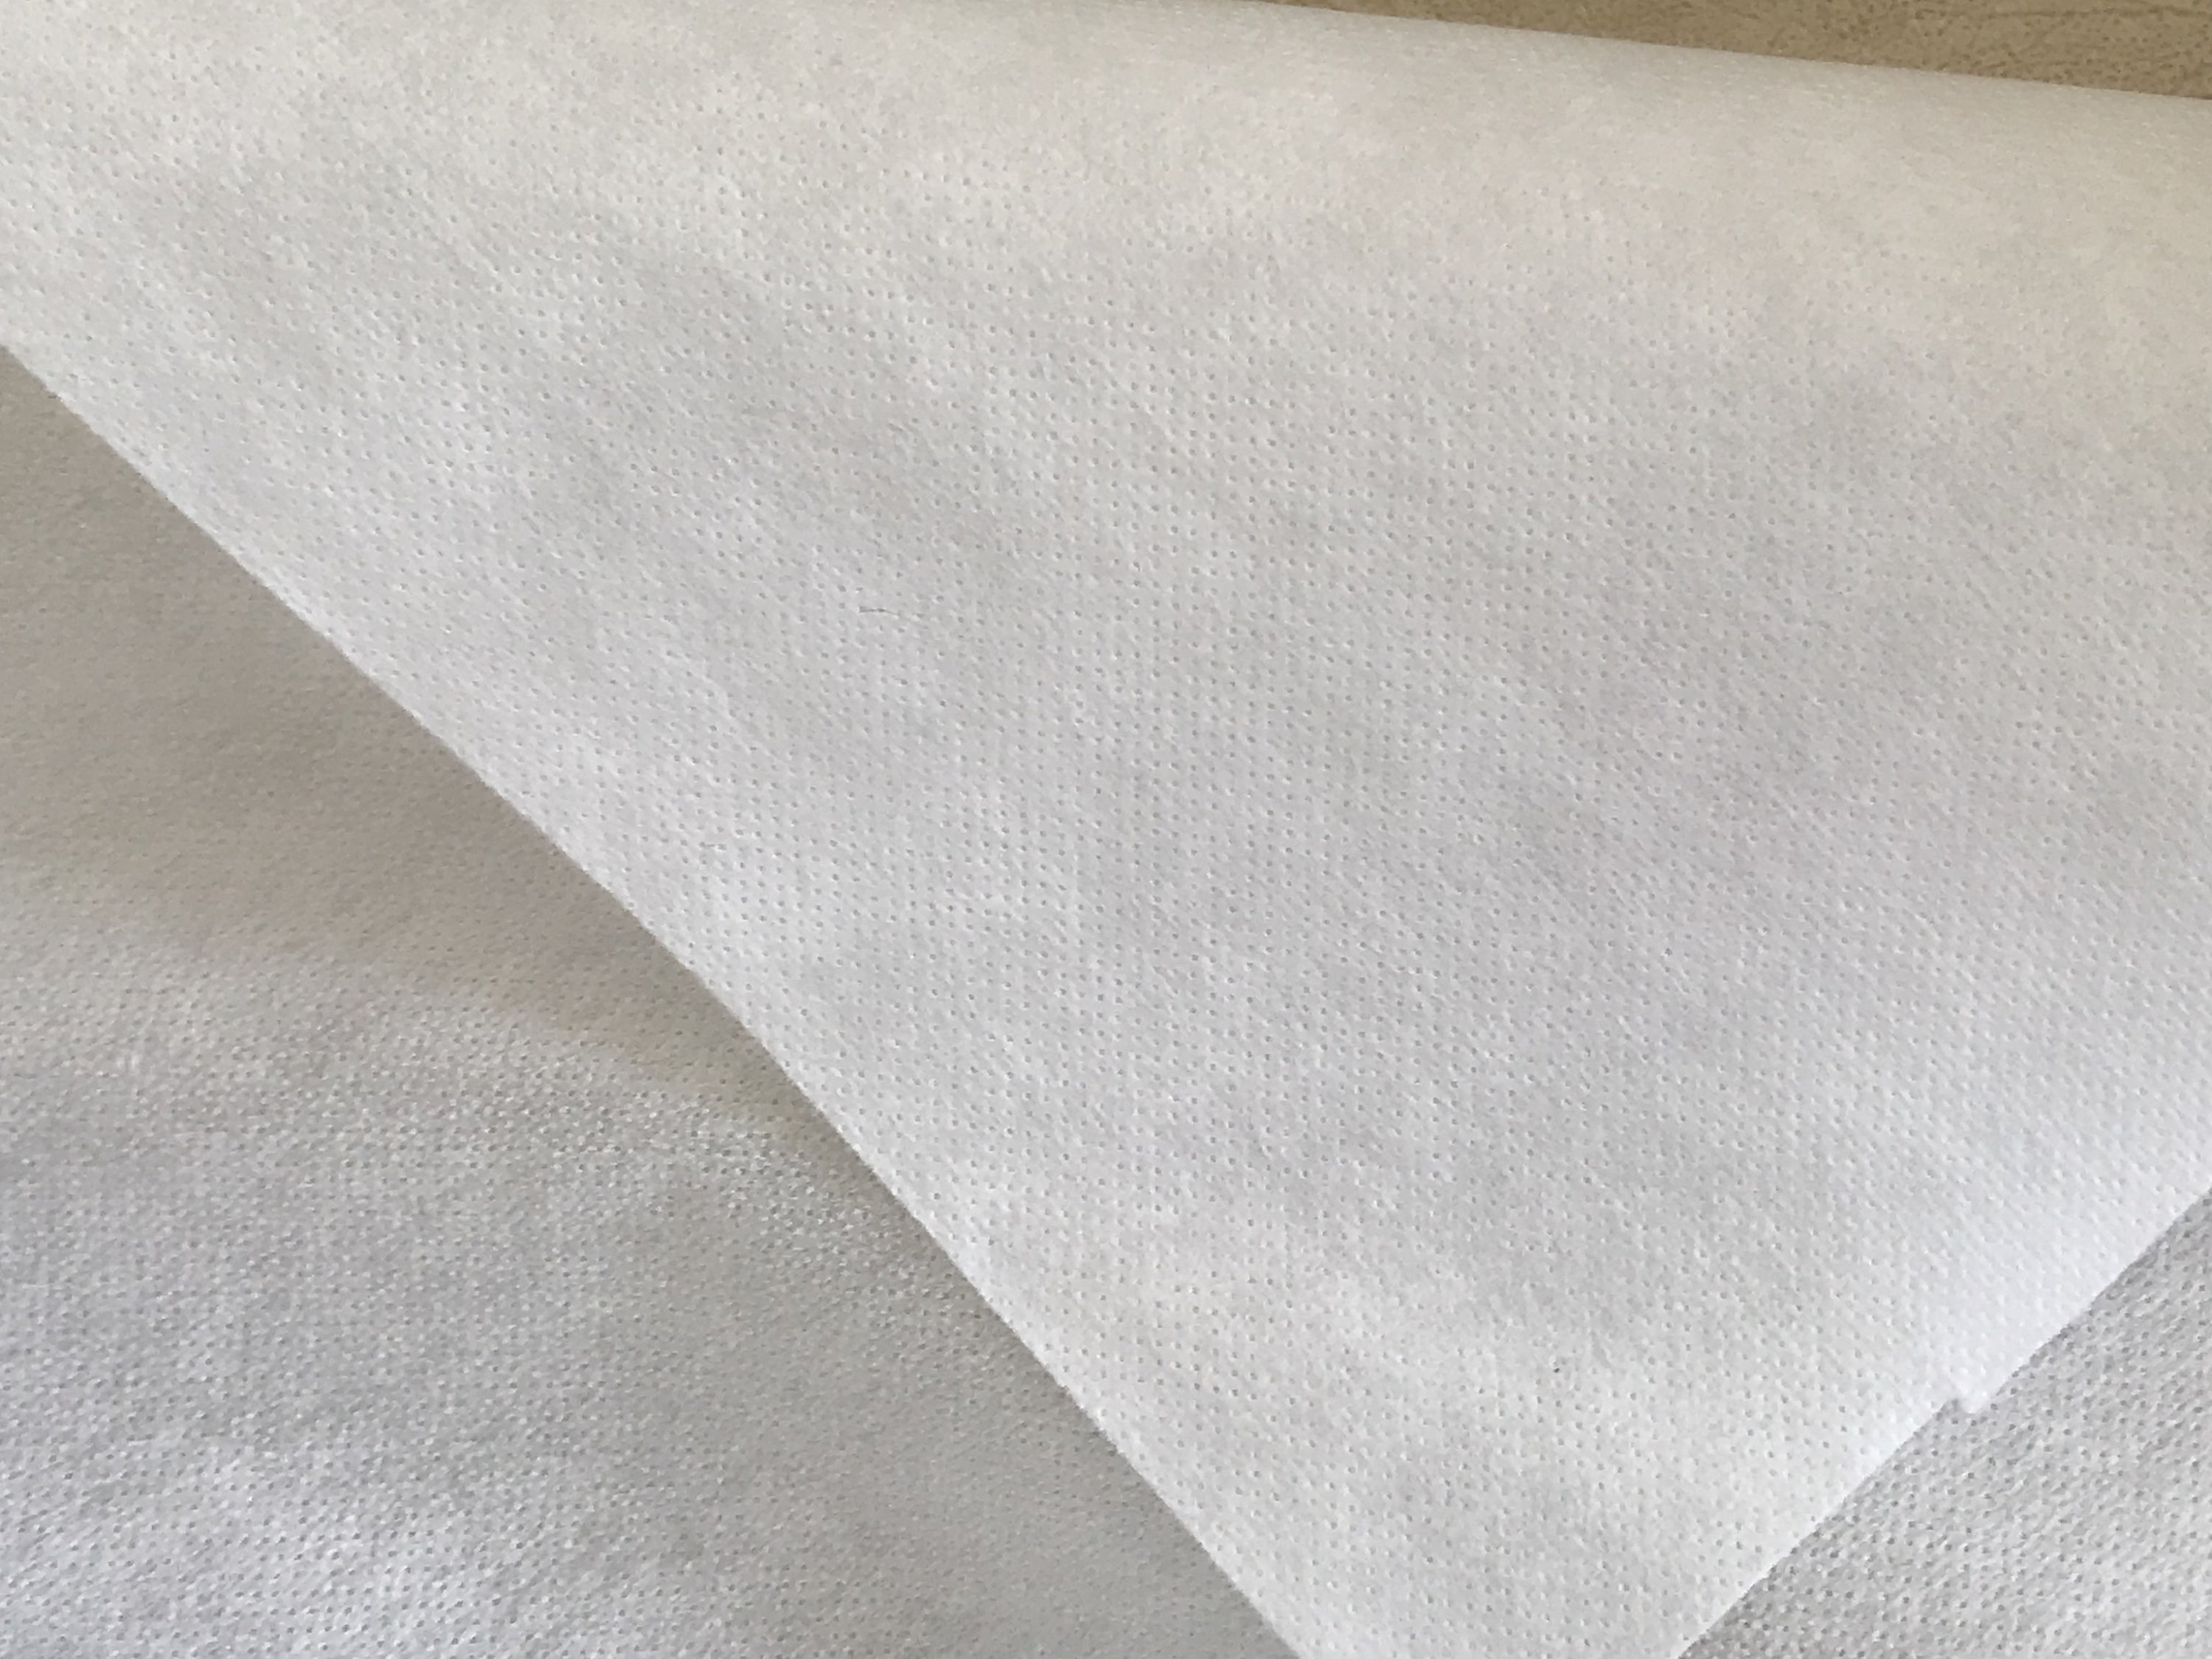 Iron on Fusible Interfacing BLACK HEAVY WEIGHT Fabric 100cm Wide per Metre  